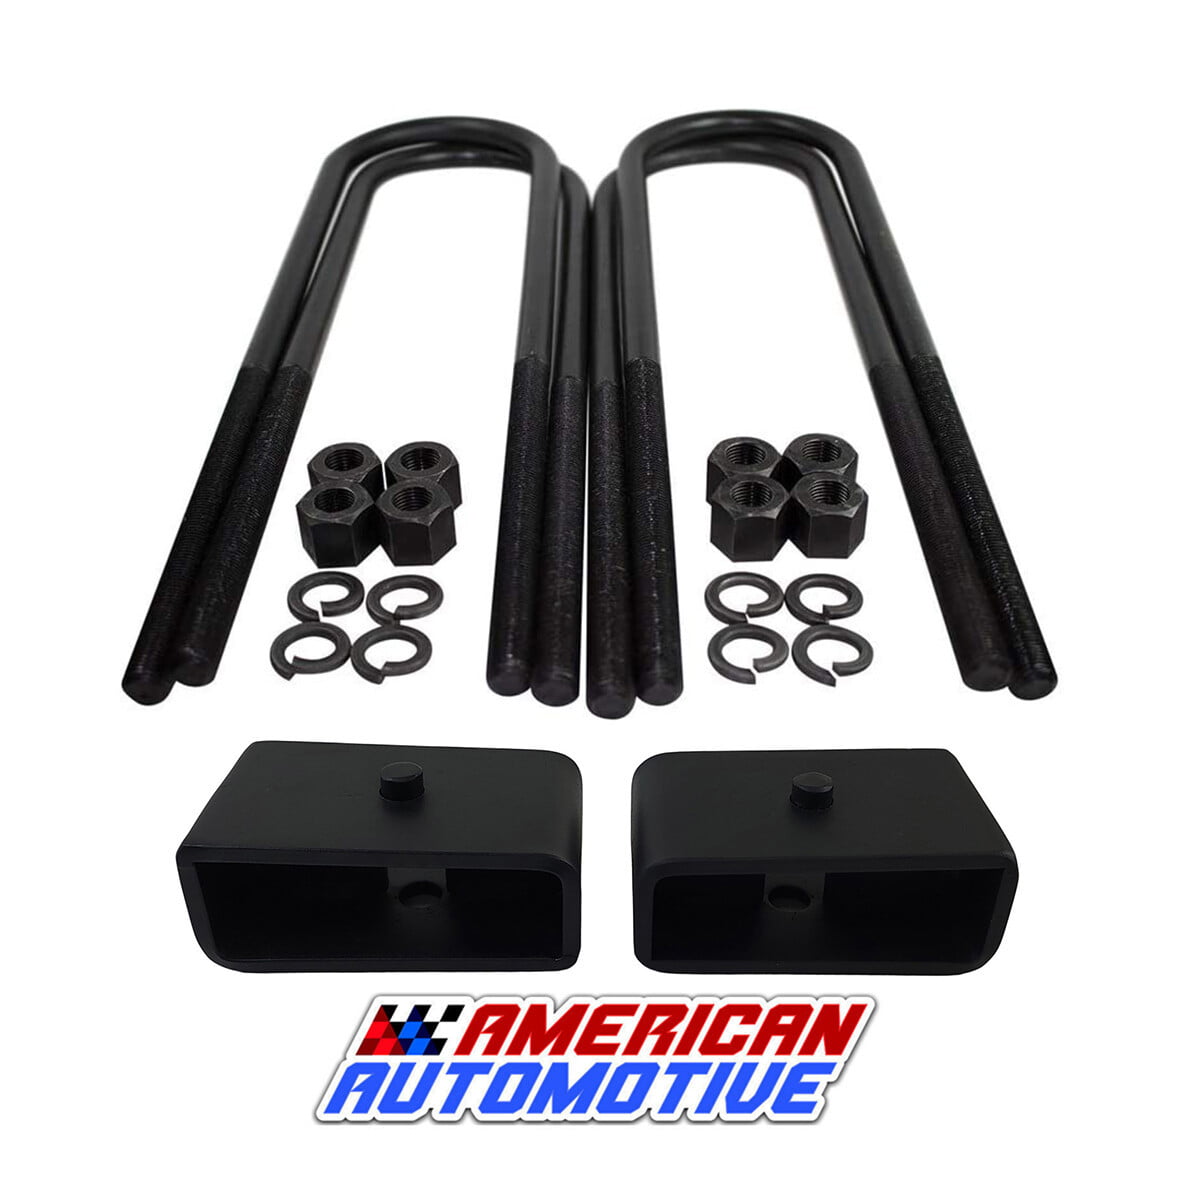 Solid American Steel 2 Rear Suspension Lift Blocks Load Capacity and Tow Package Upgrade